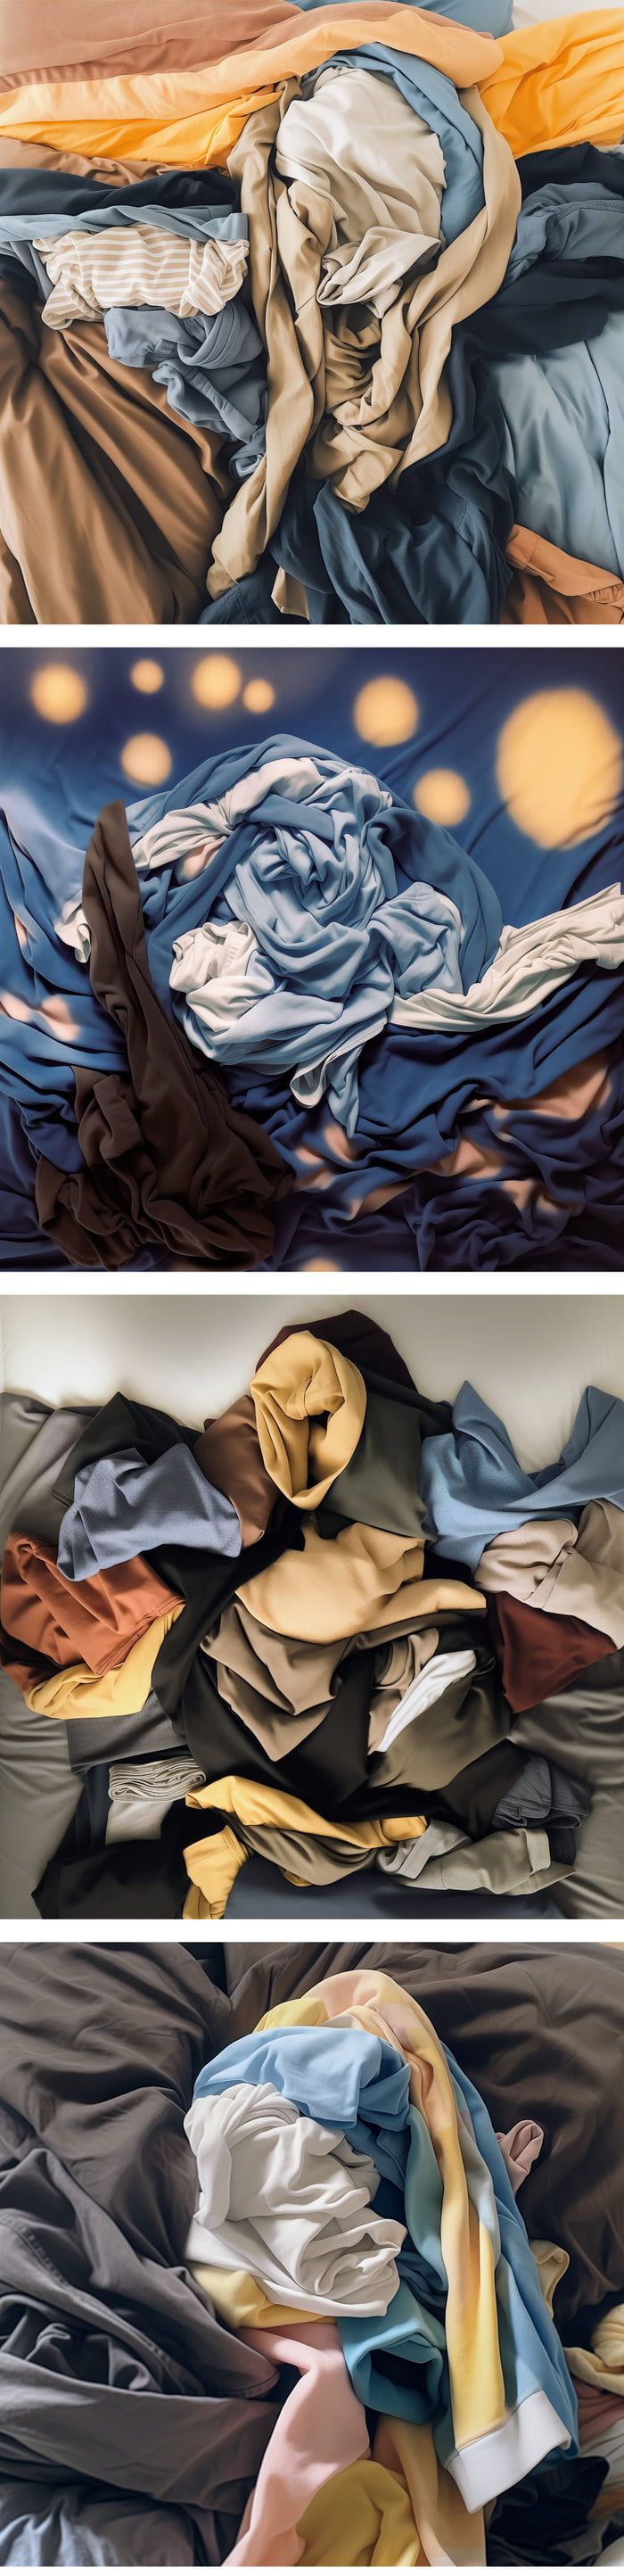 The Art of Laundry